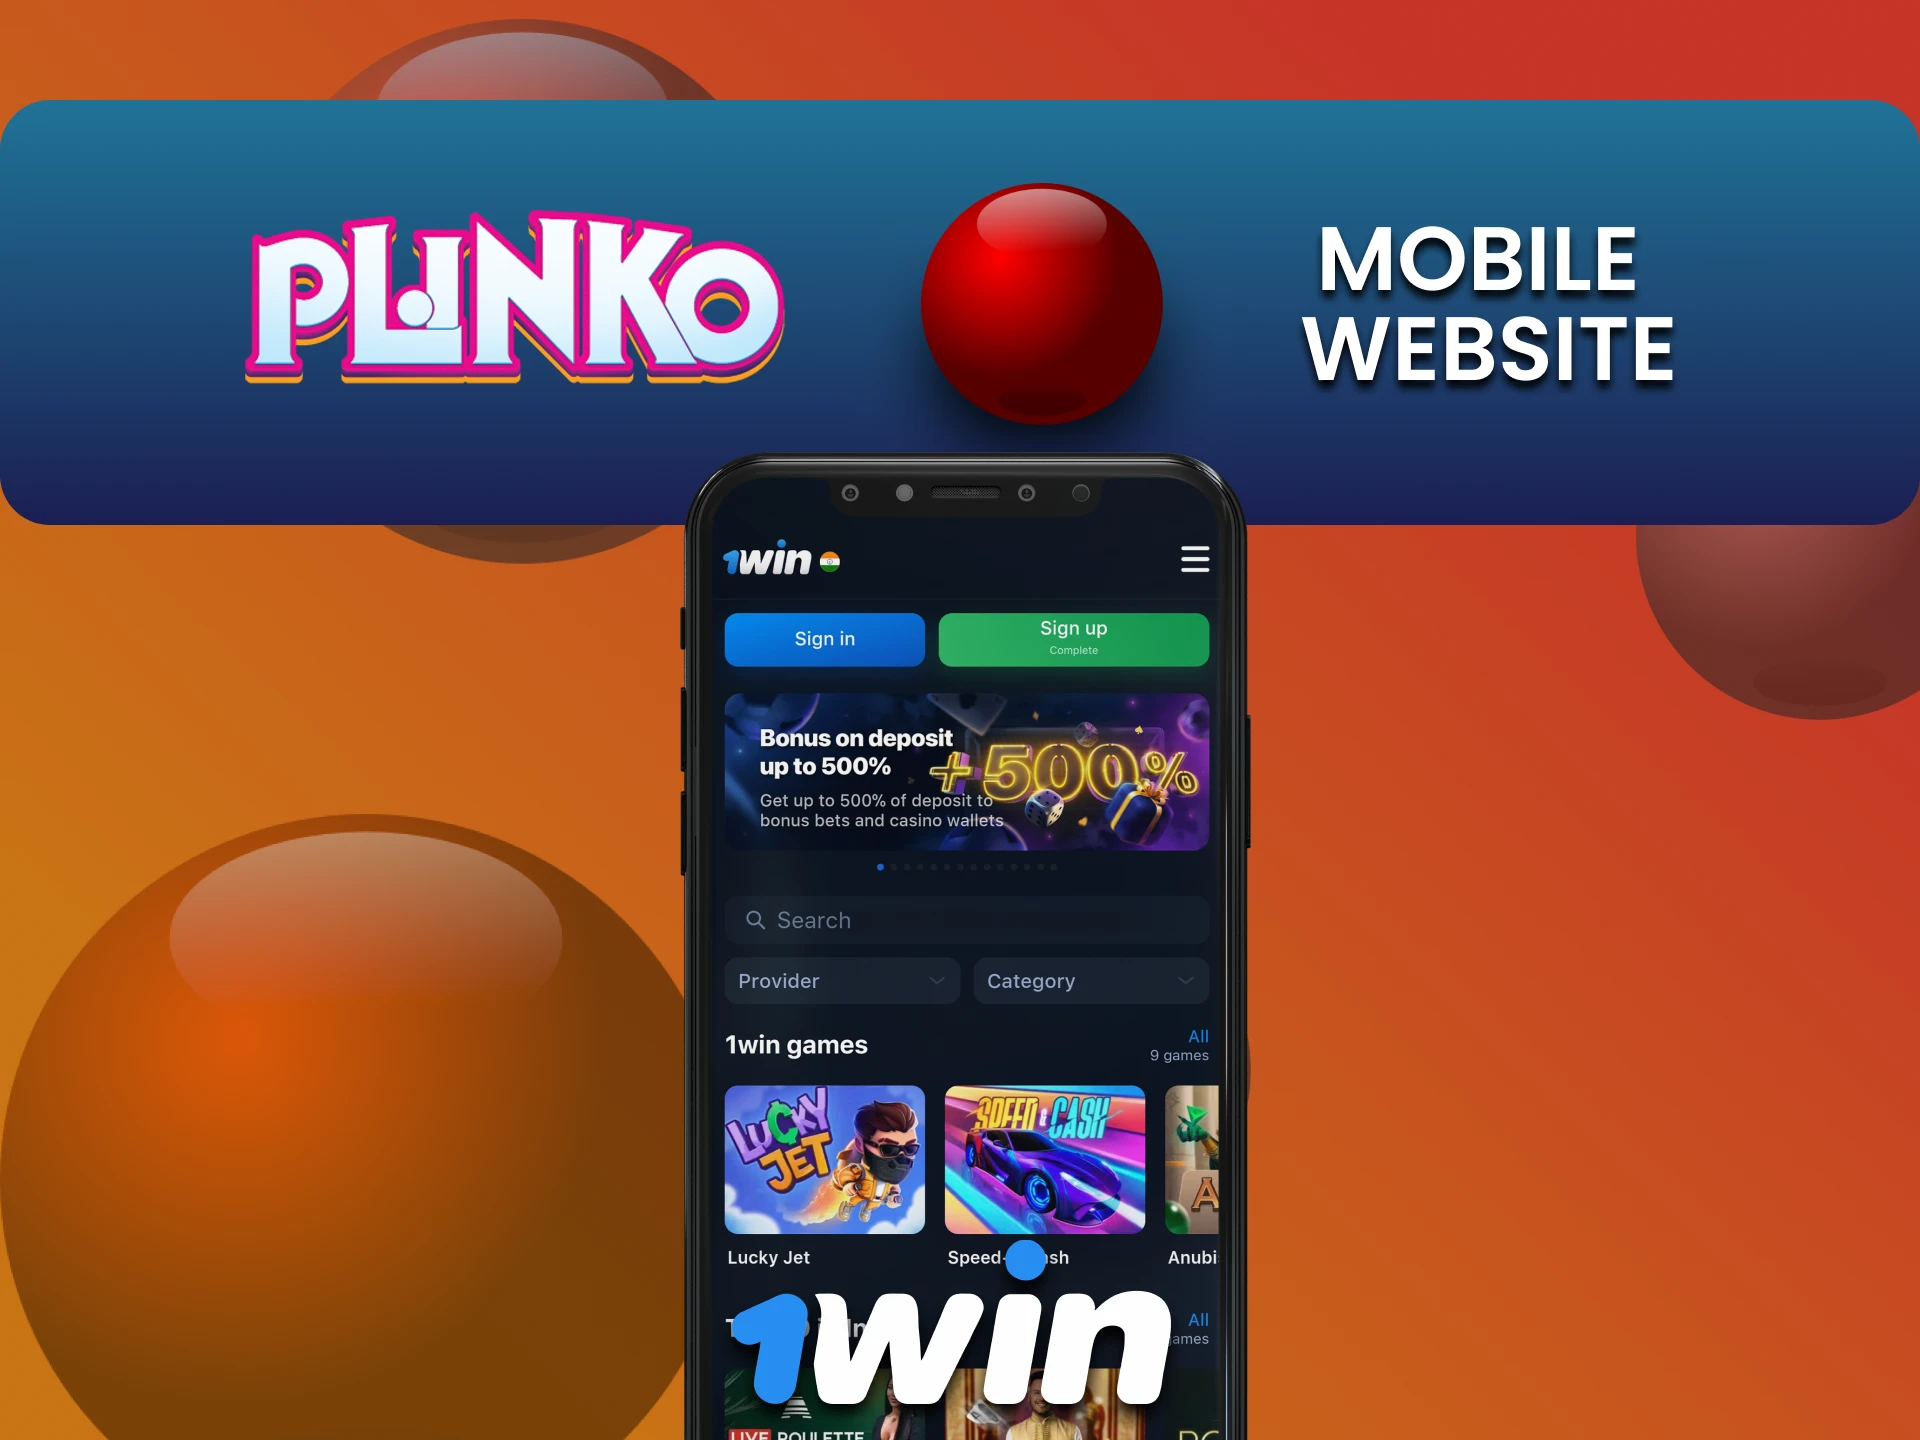 Visit the mobile version of the 1win website to play Plinko.